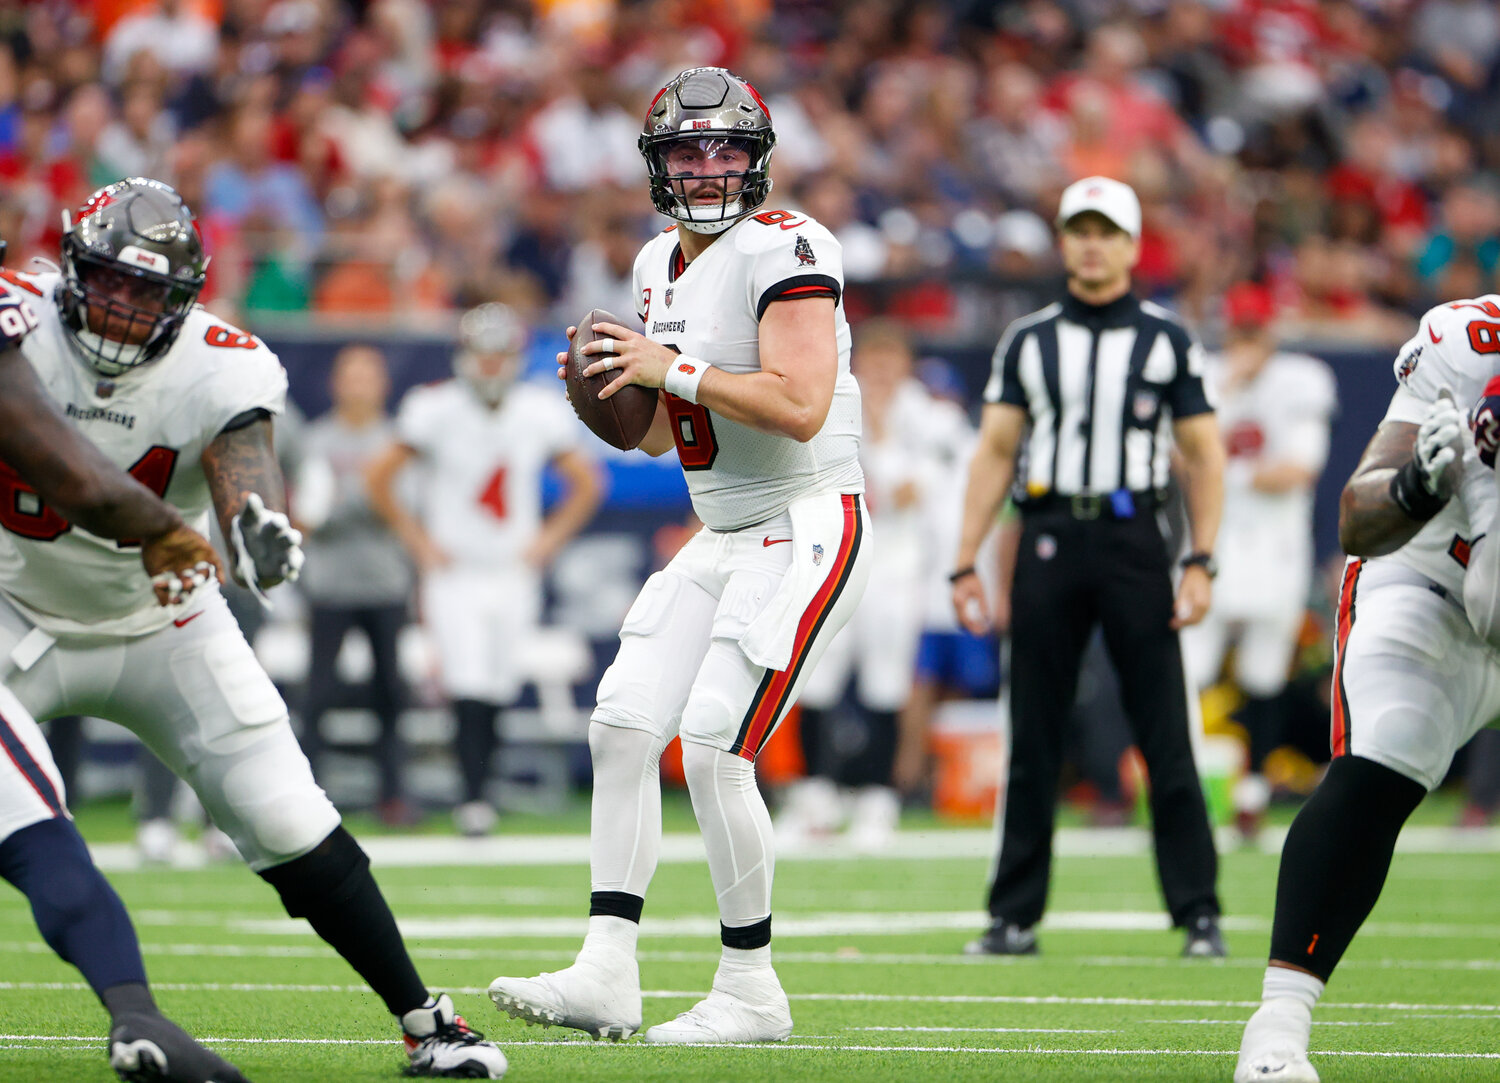 Buccaneers quarterback Baker Mayfield (6) looks to pass during an NFL game between the Houston Texans and the Tampa Bay Buccaneers on November 5, 2023 in Houston.